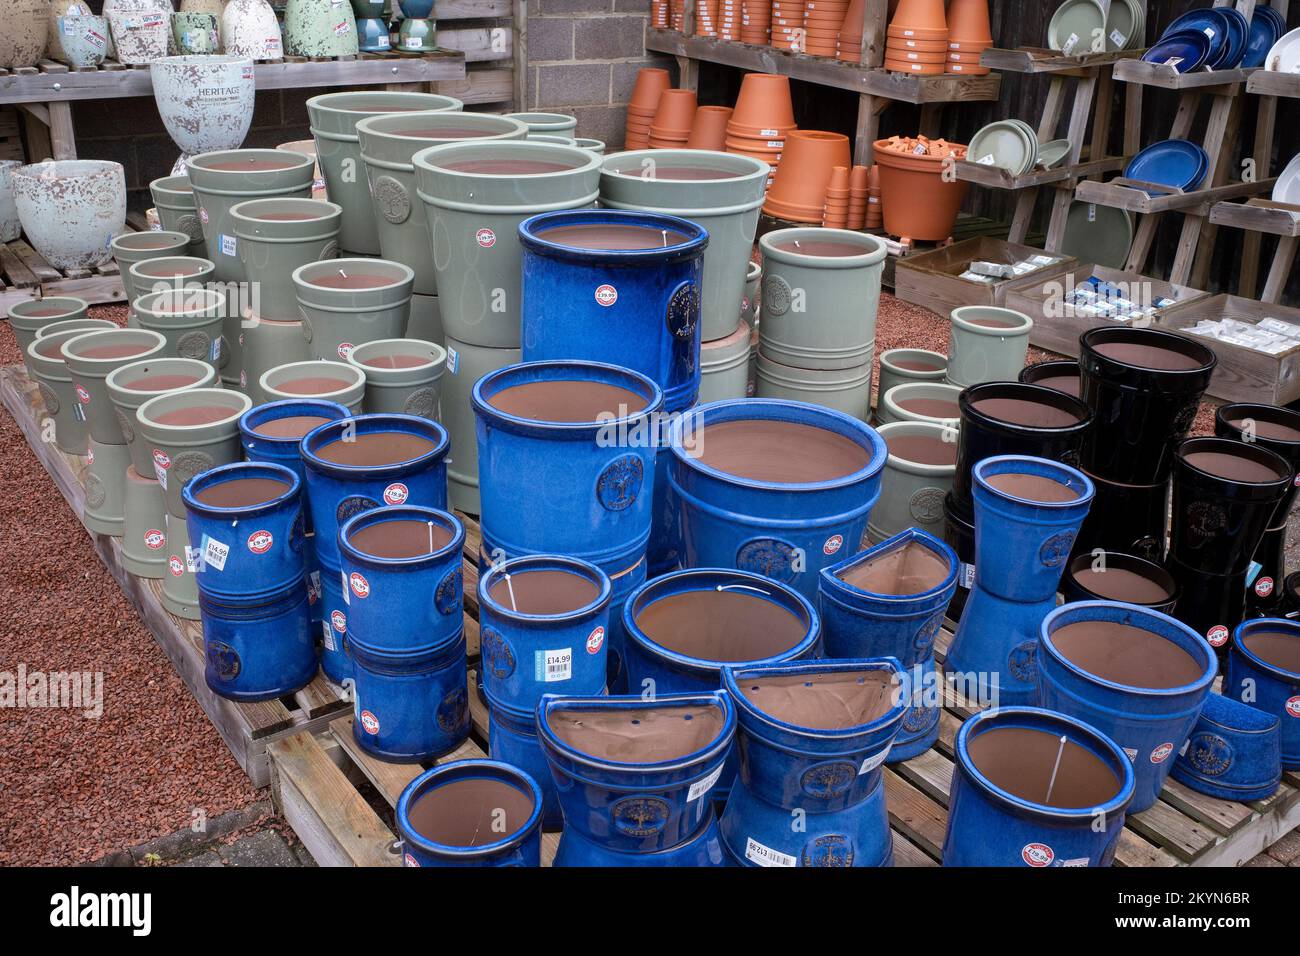 A display of bright blue grey and black glazed clay flower pots on offer at a garden centre in North Yorkshire Stock Photo